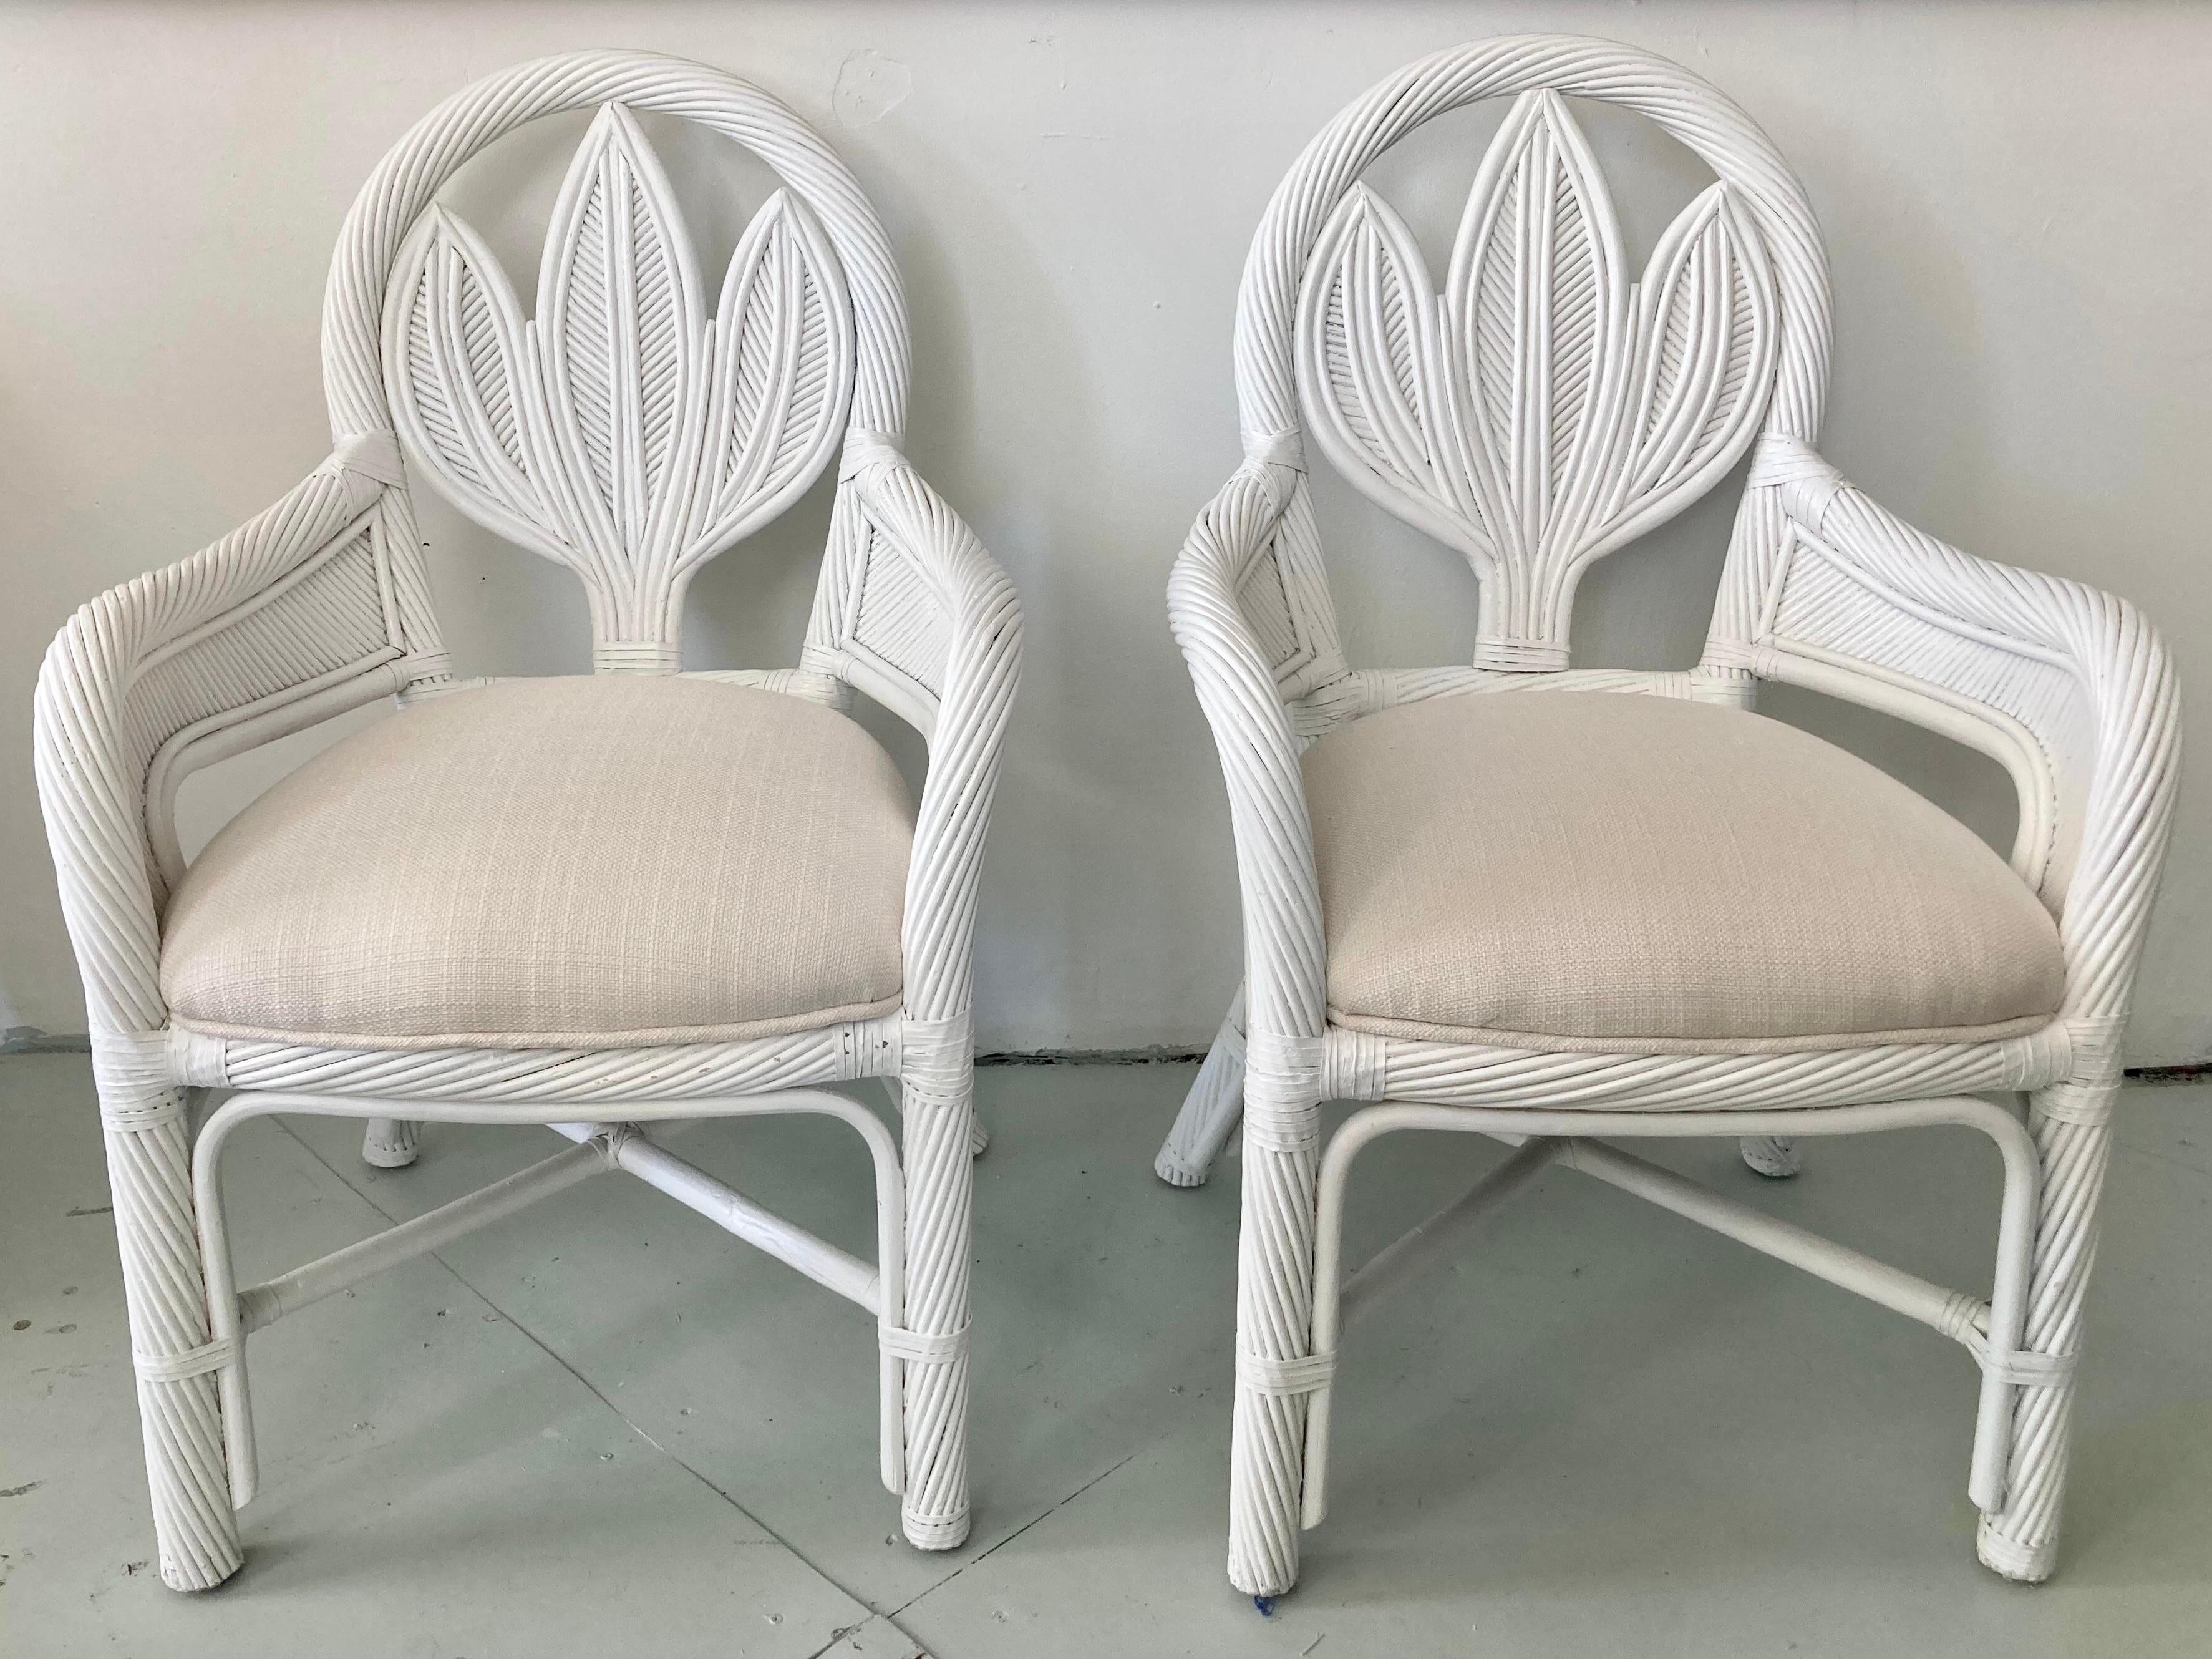 Fabulous pair of Gabriella Crespi Pencil Reed arm chairs. Newly lacquered in white and with new Todd Hase upholstery. Great addition to your Boho Chic interiors.